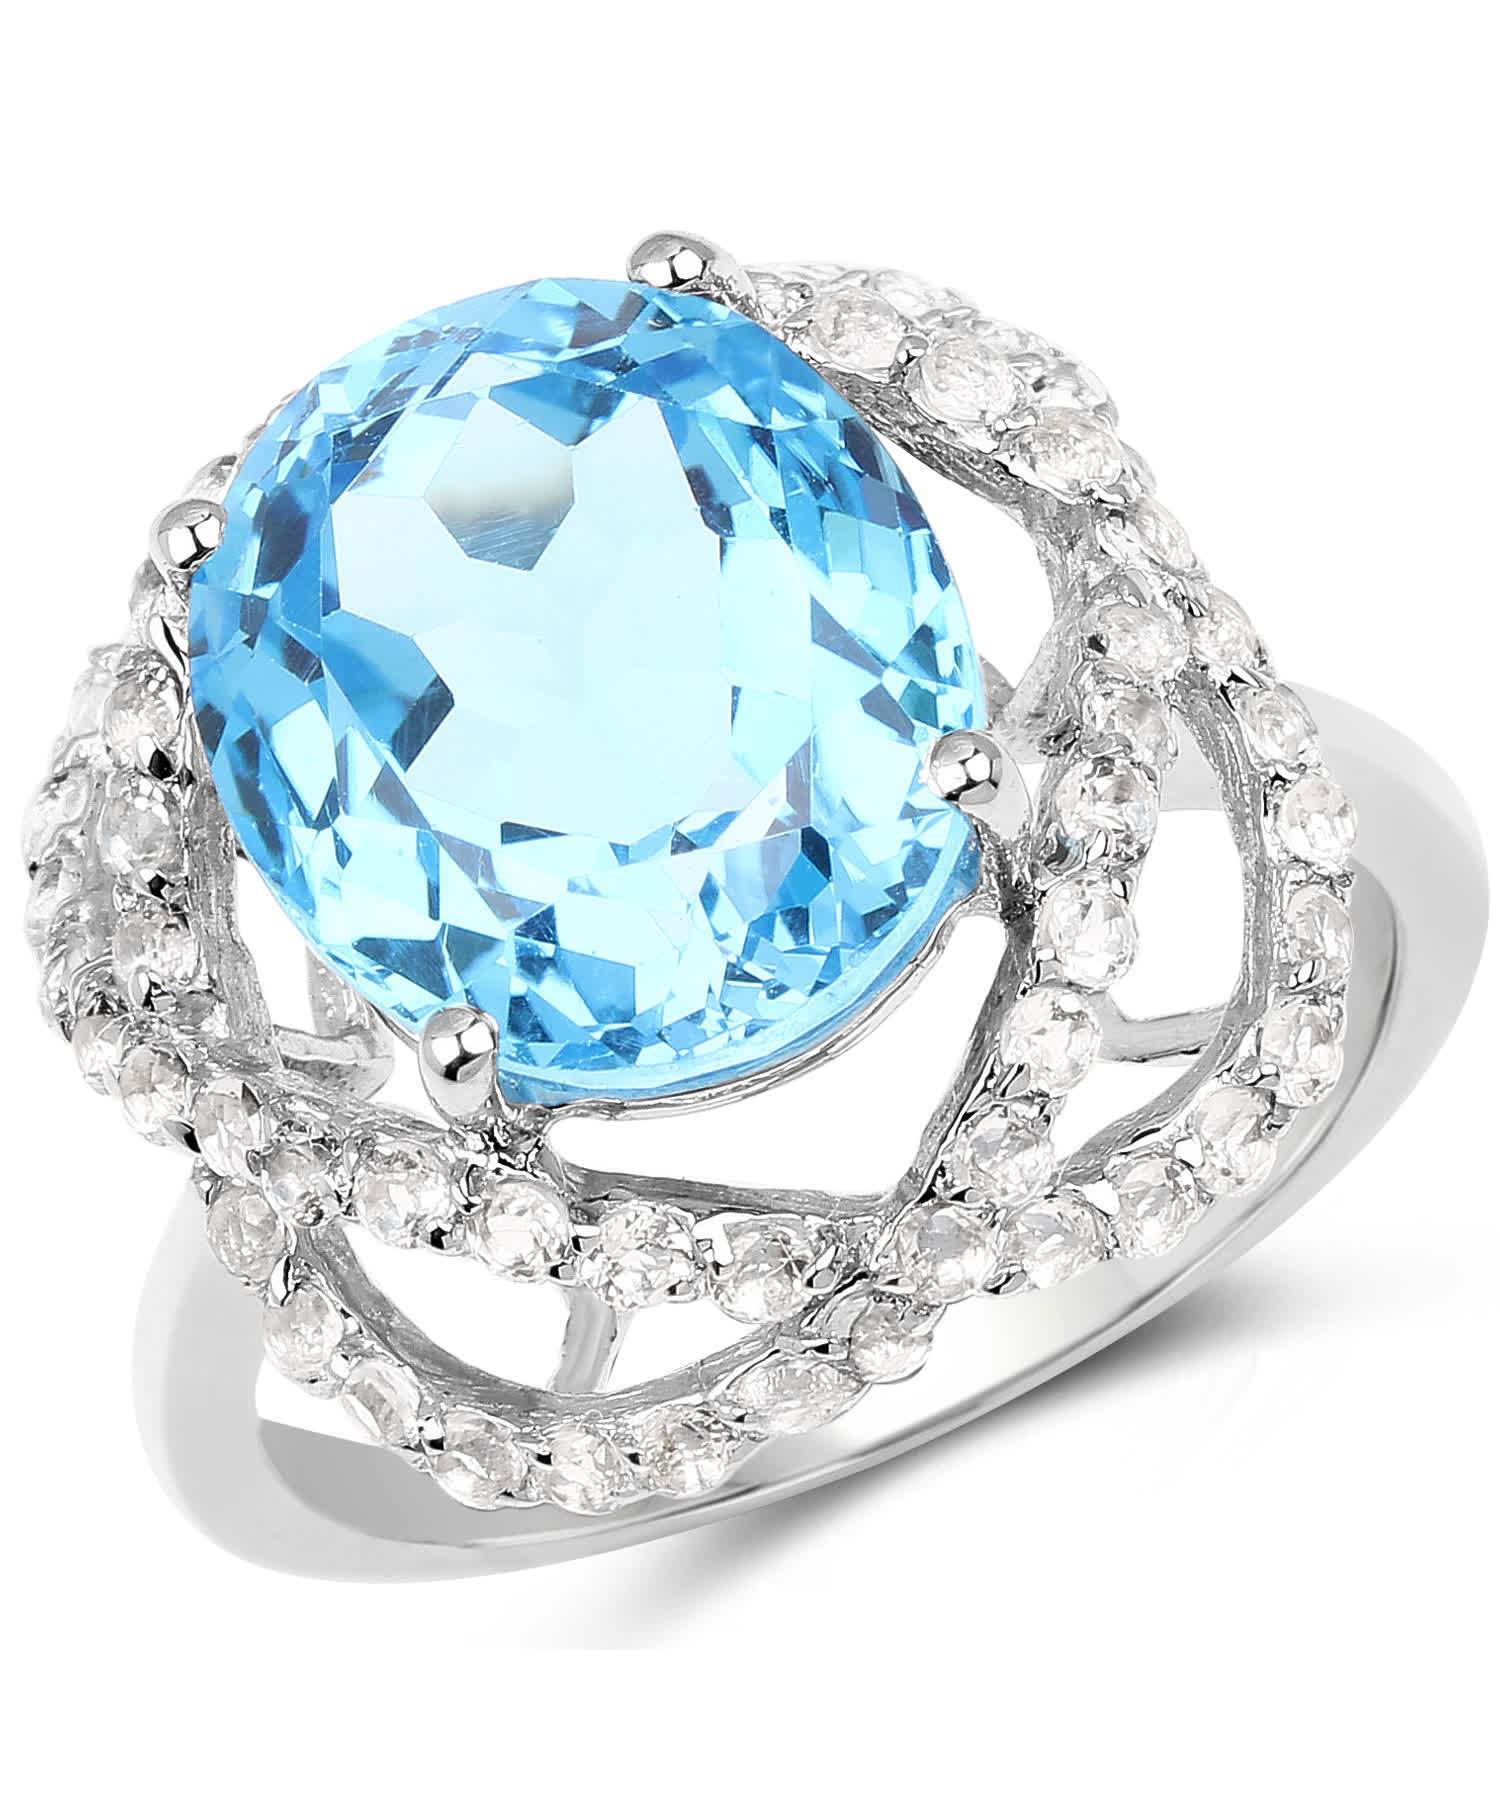 7.32ctw Natural Swiss Blue Topaz Rhodium Plated 925 Sterling Silver Cocktail Ring View 1